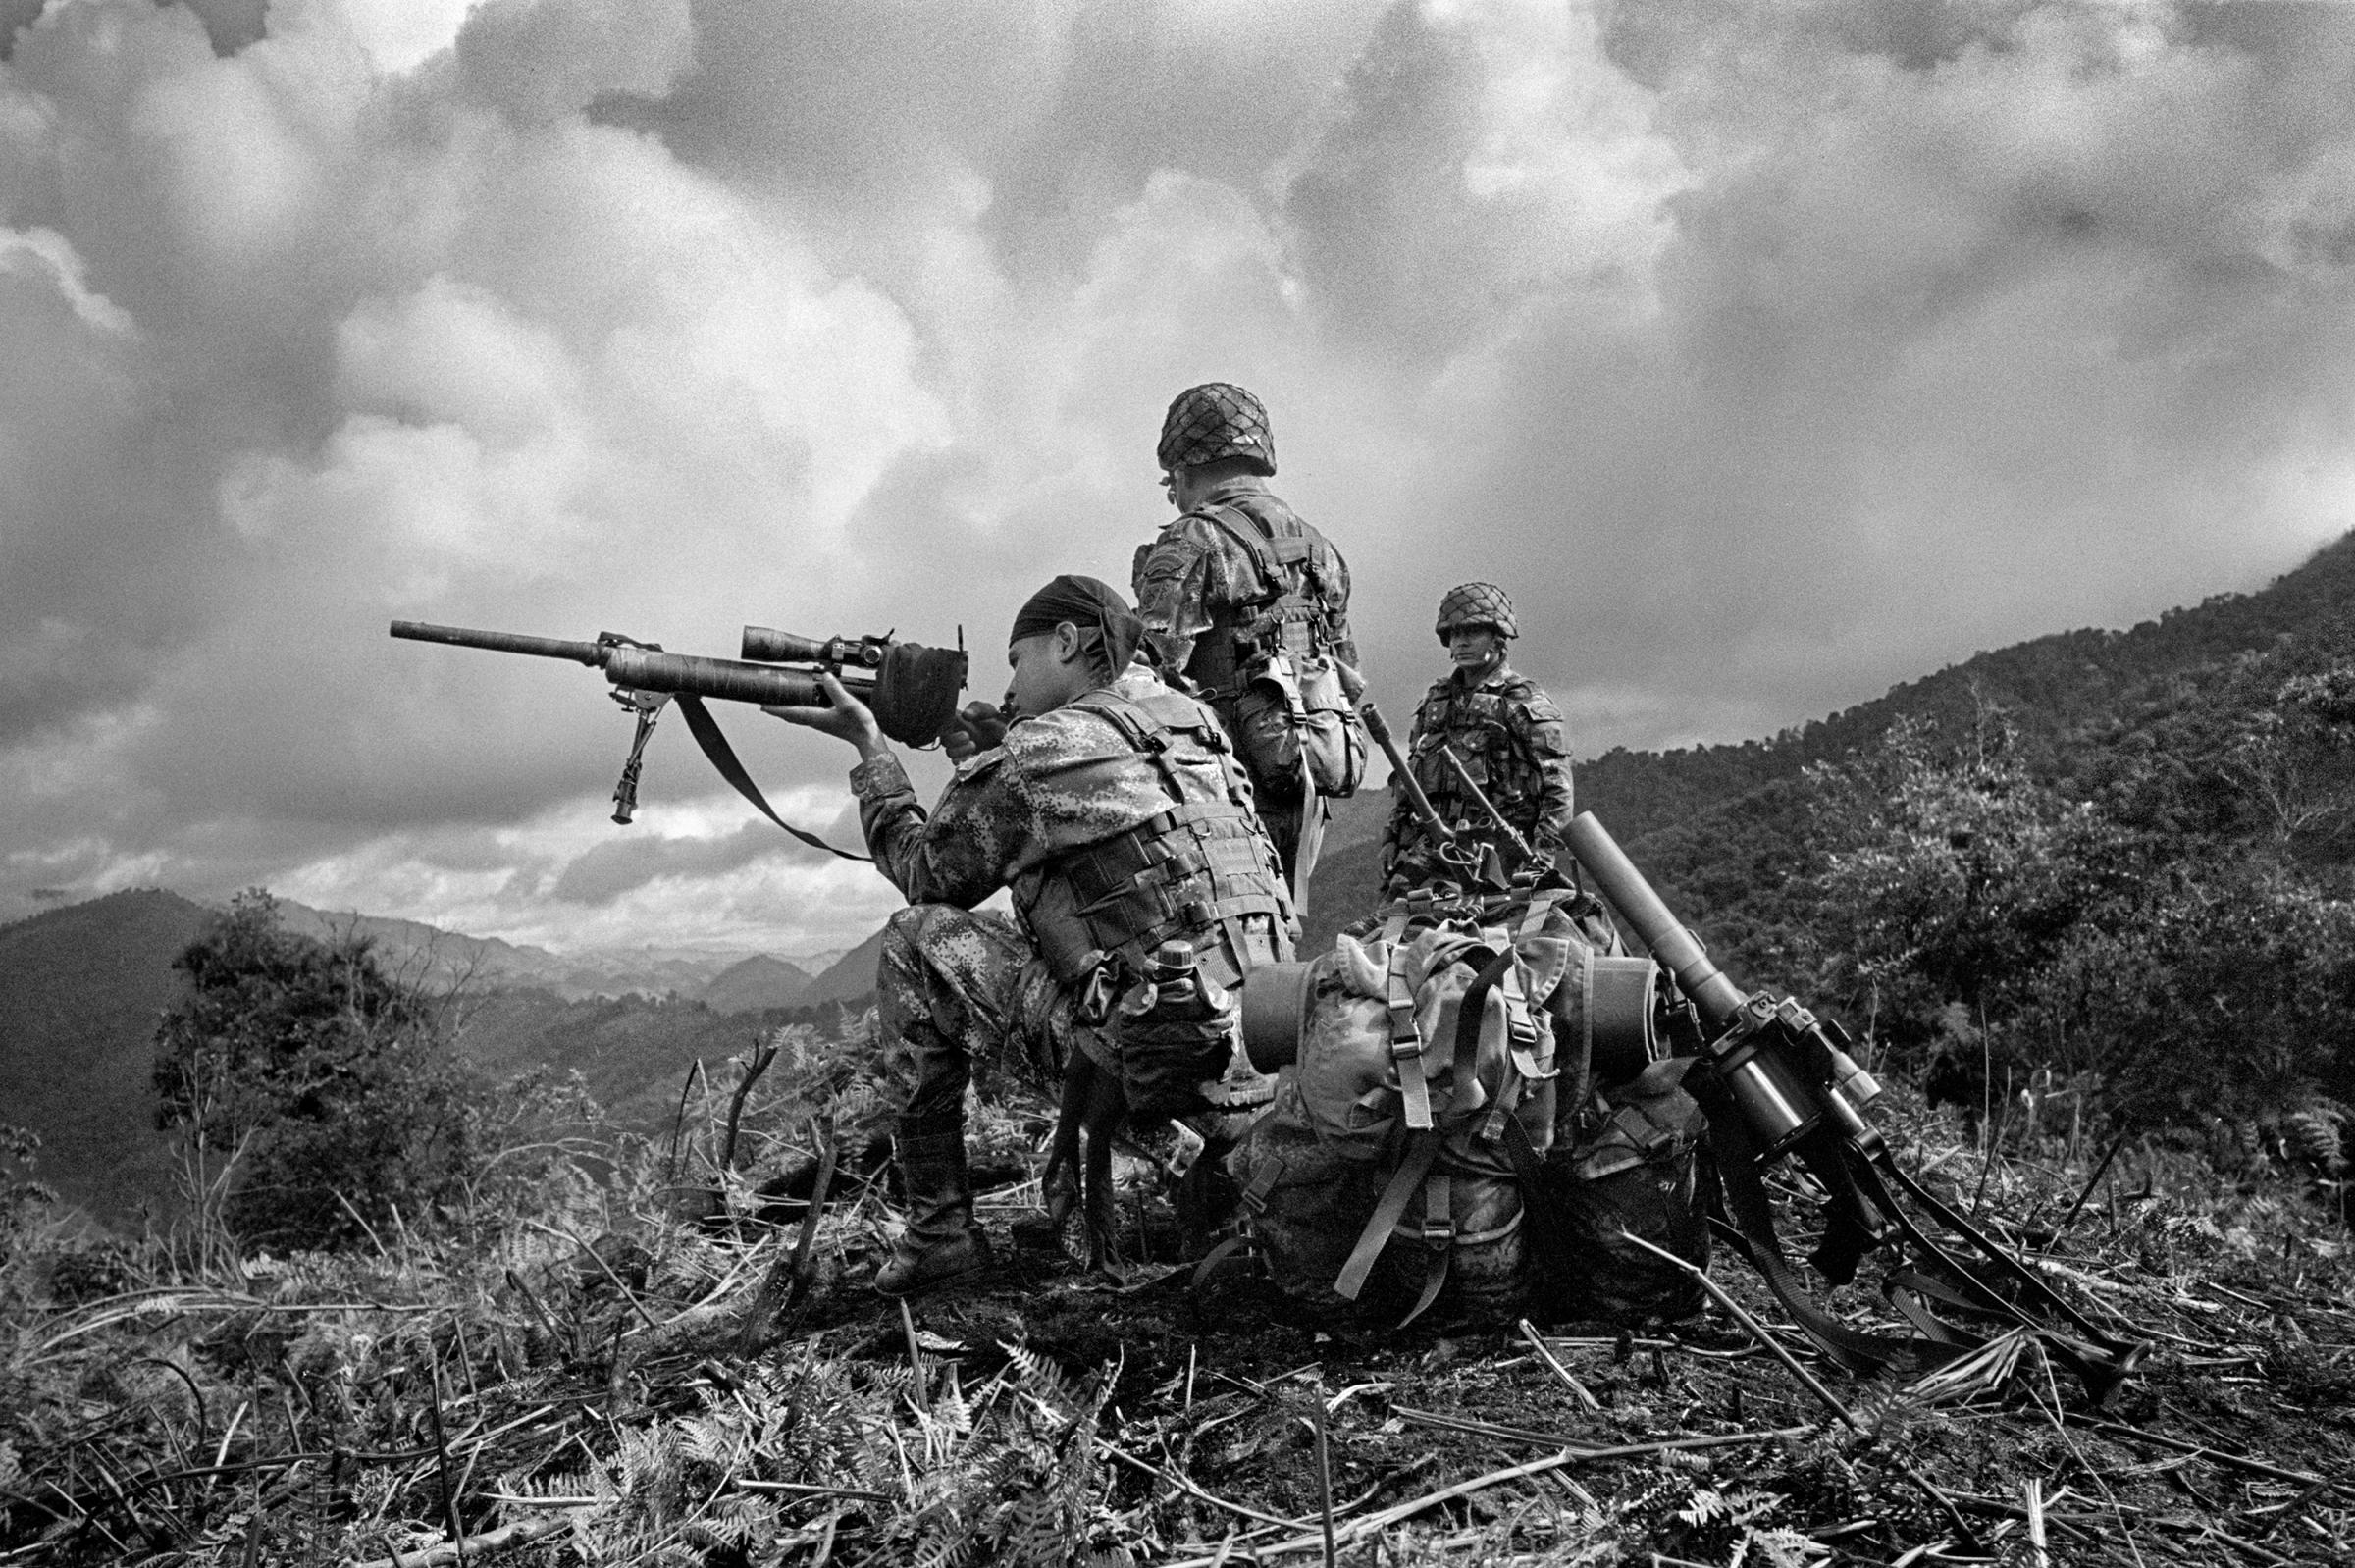 Soldiers of the Mobile Brigade No. 8 of the Joint Task Force South of Tolima during a military operation against FARC in a village in the municipality of Planadas, southern Tolima. Planadas has been a major historical stronghold of FARC in Colombia, May 2011.